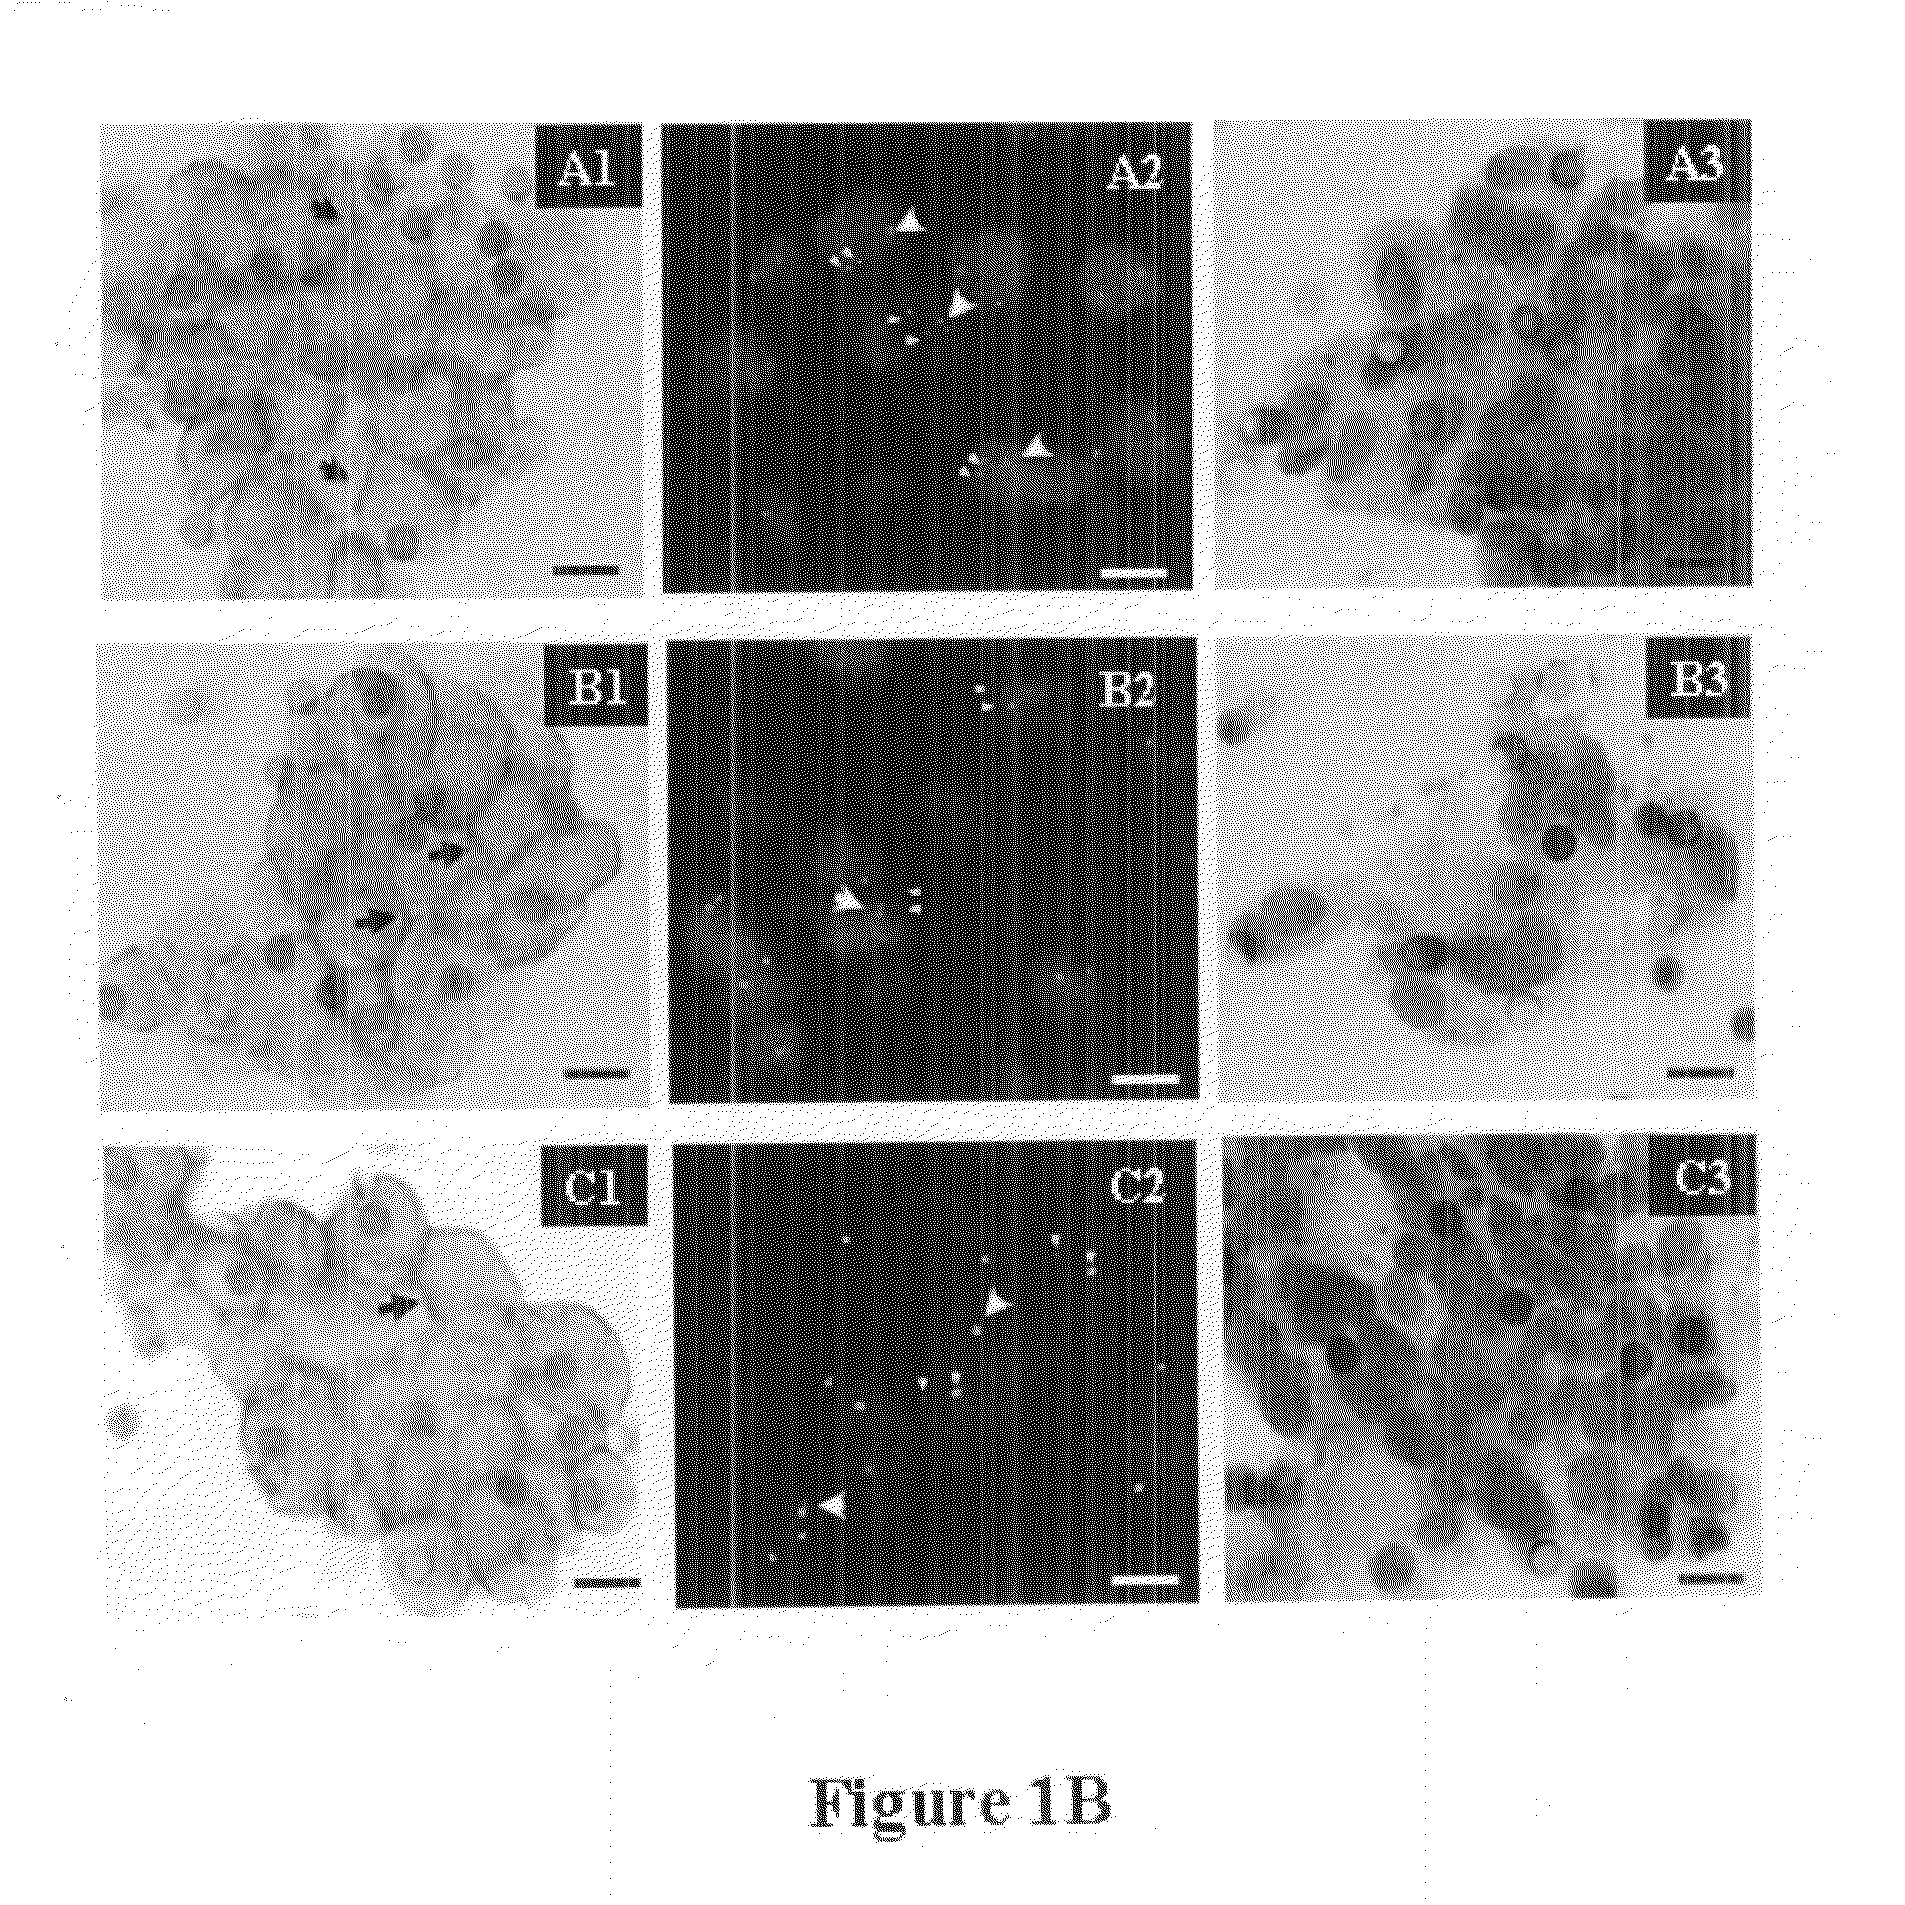 Process for multi-analyses of rare cells extracted or isolated from biological samples through filtration